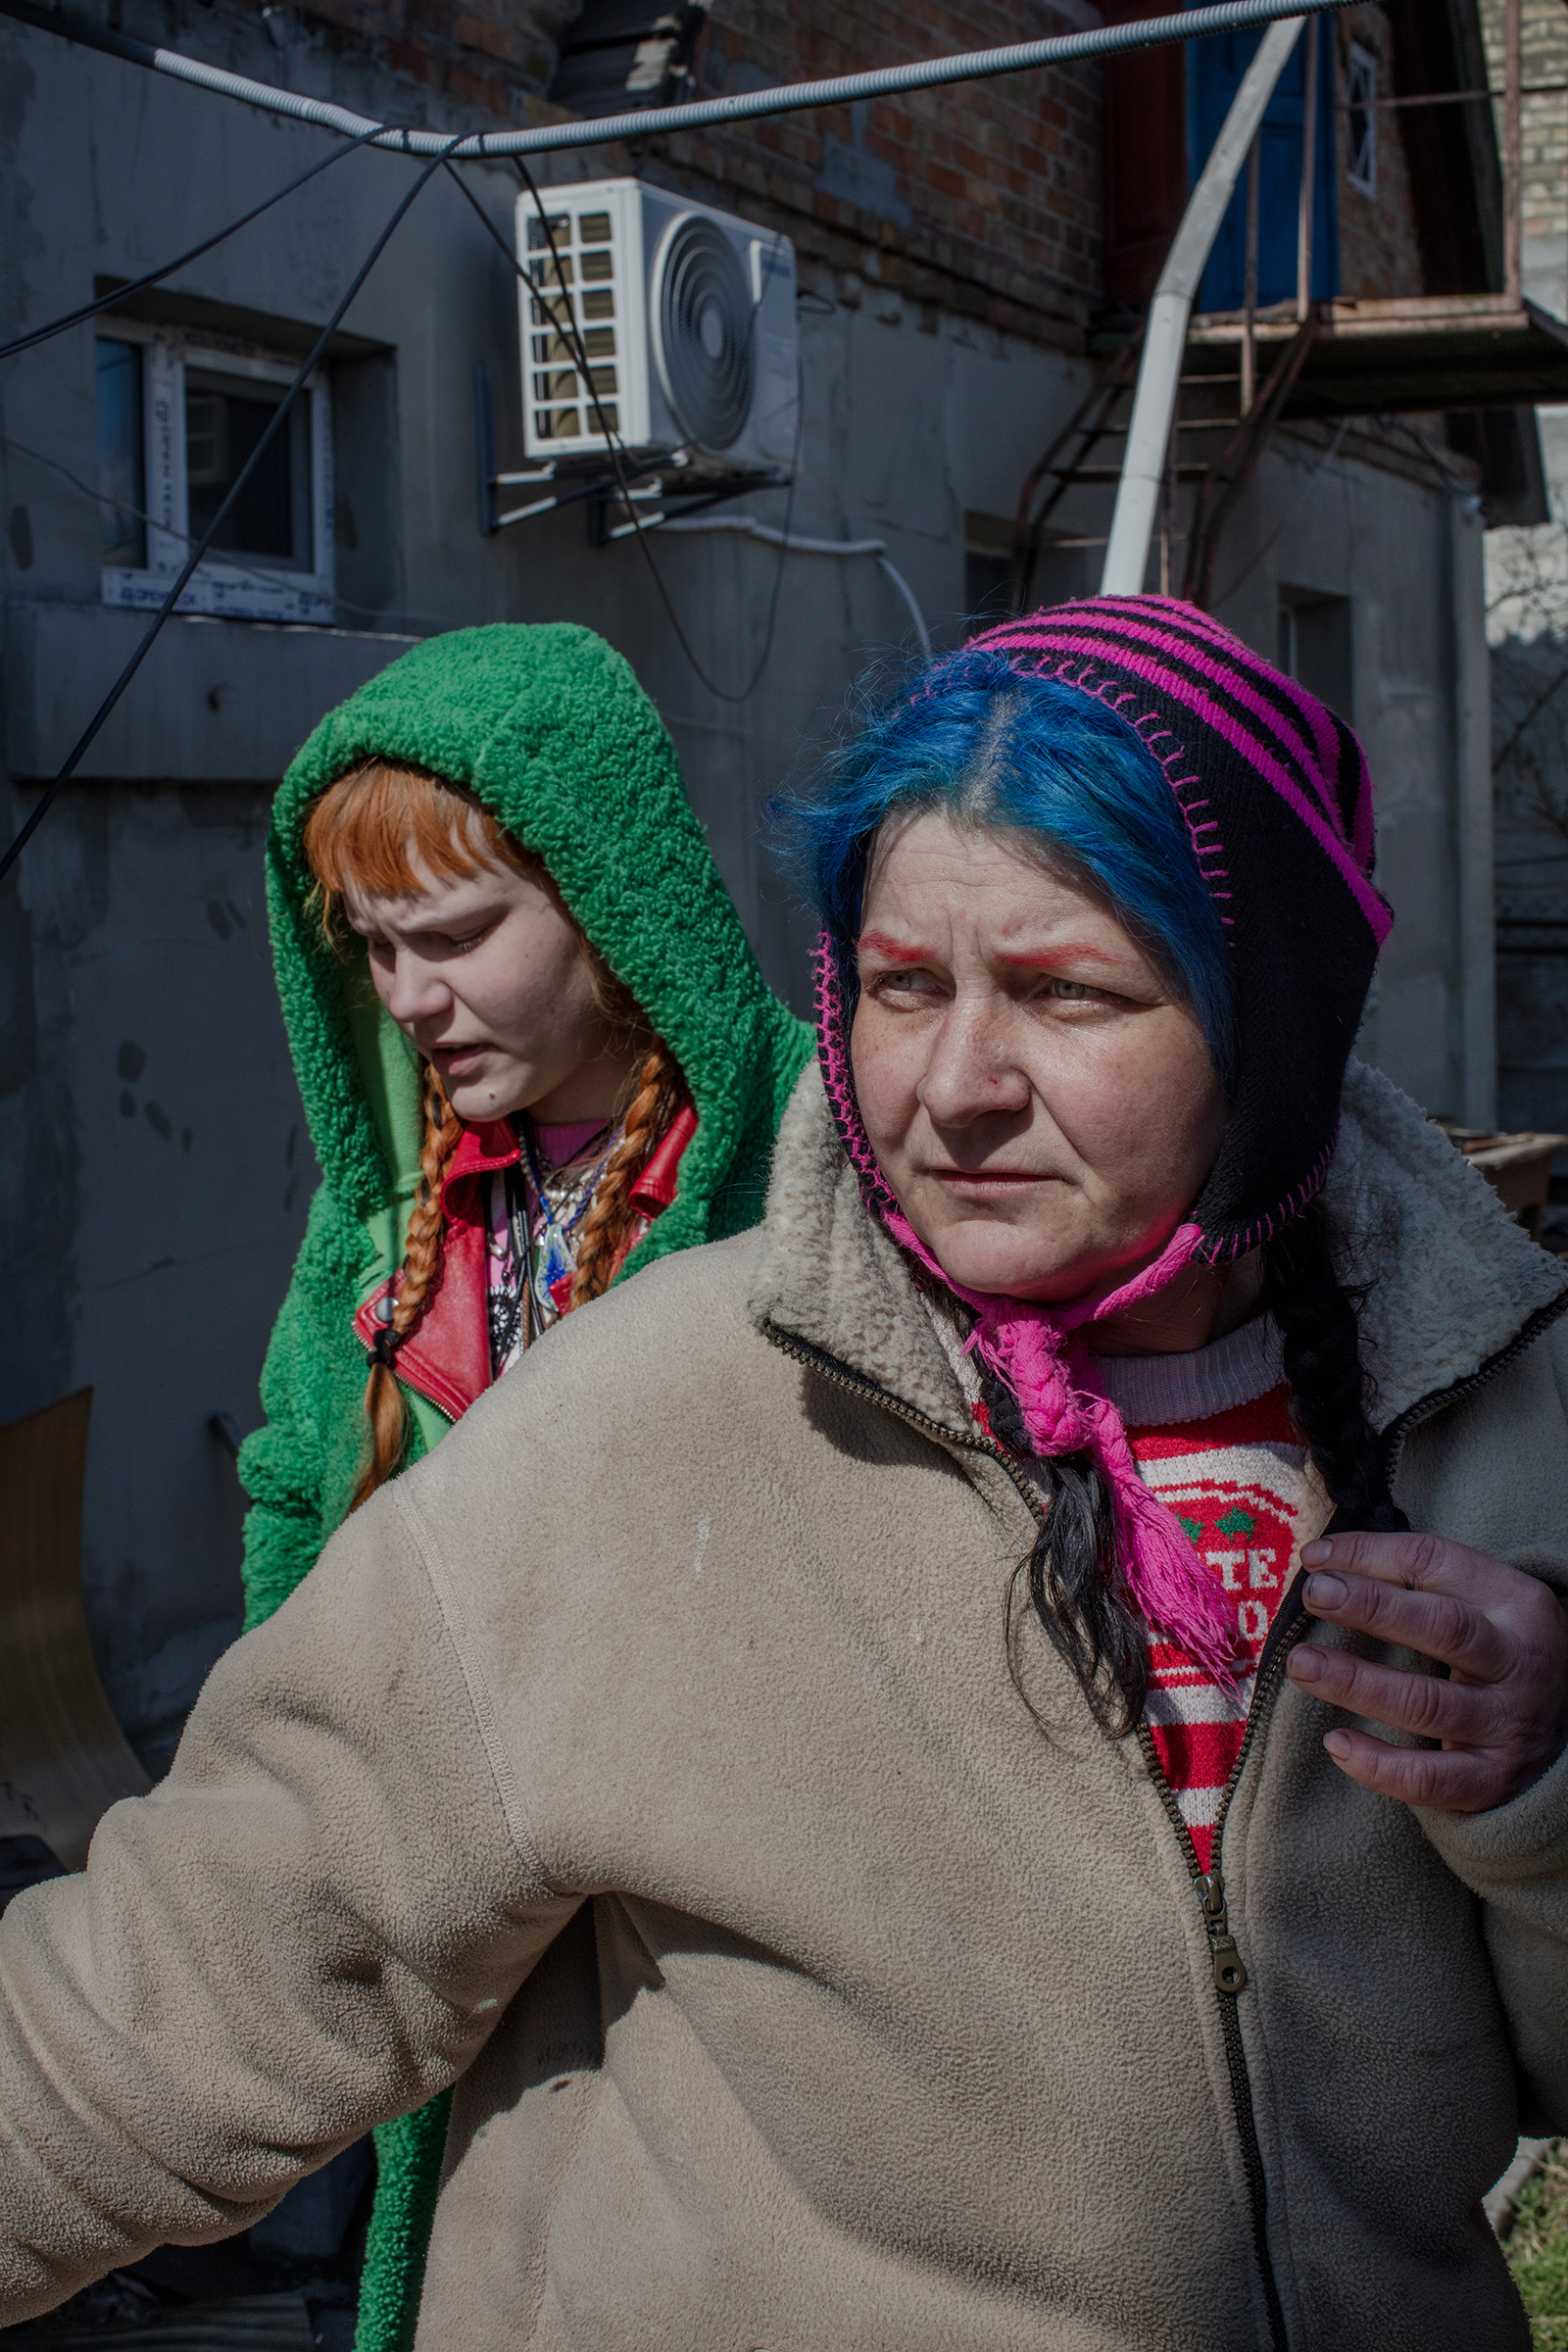 Gala and her daughter Veronika hid at home throughout the occupation in Bucha. Gala, with blue hair, said that the soldiers would come into her home twice a day threatening to kill them and terrorizing the neighborhood. (Natalie Keyssar)